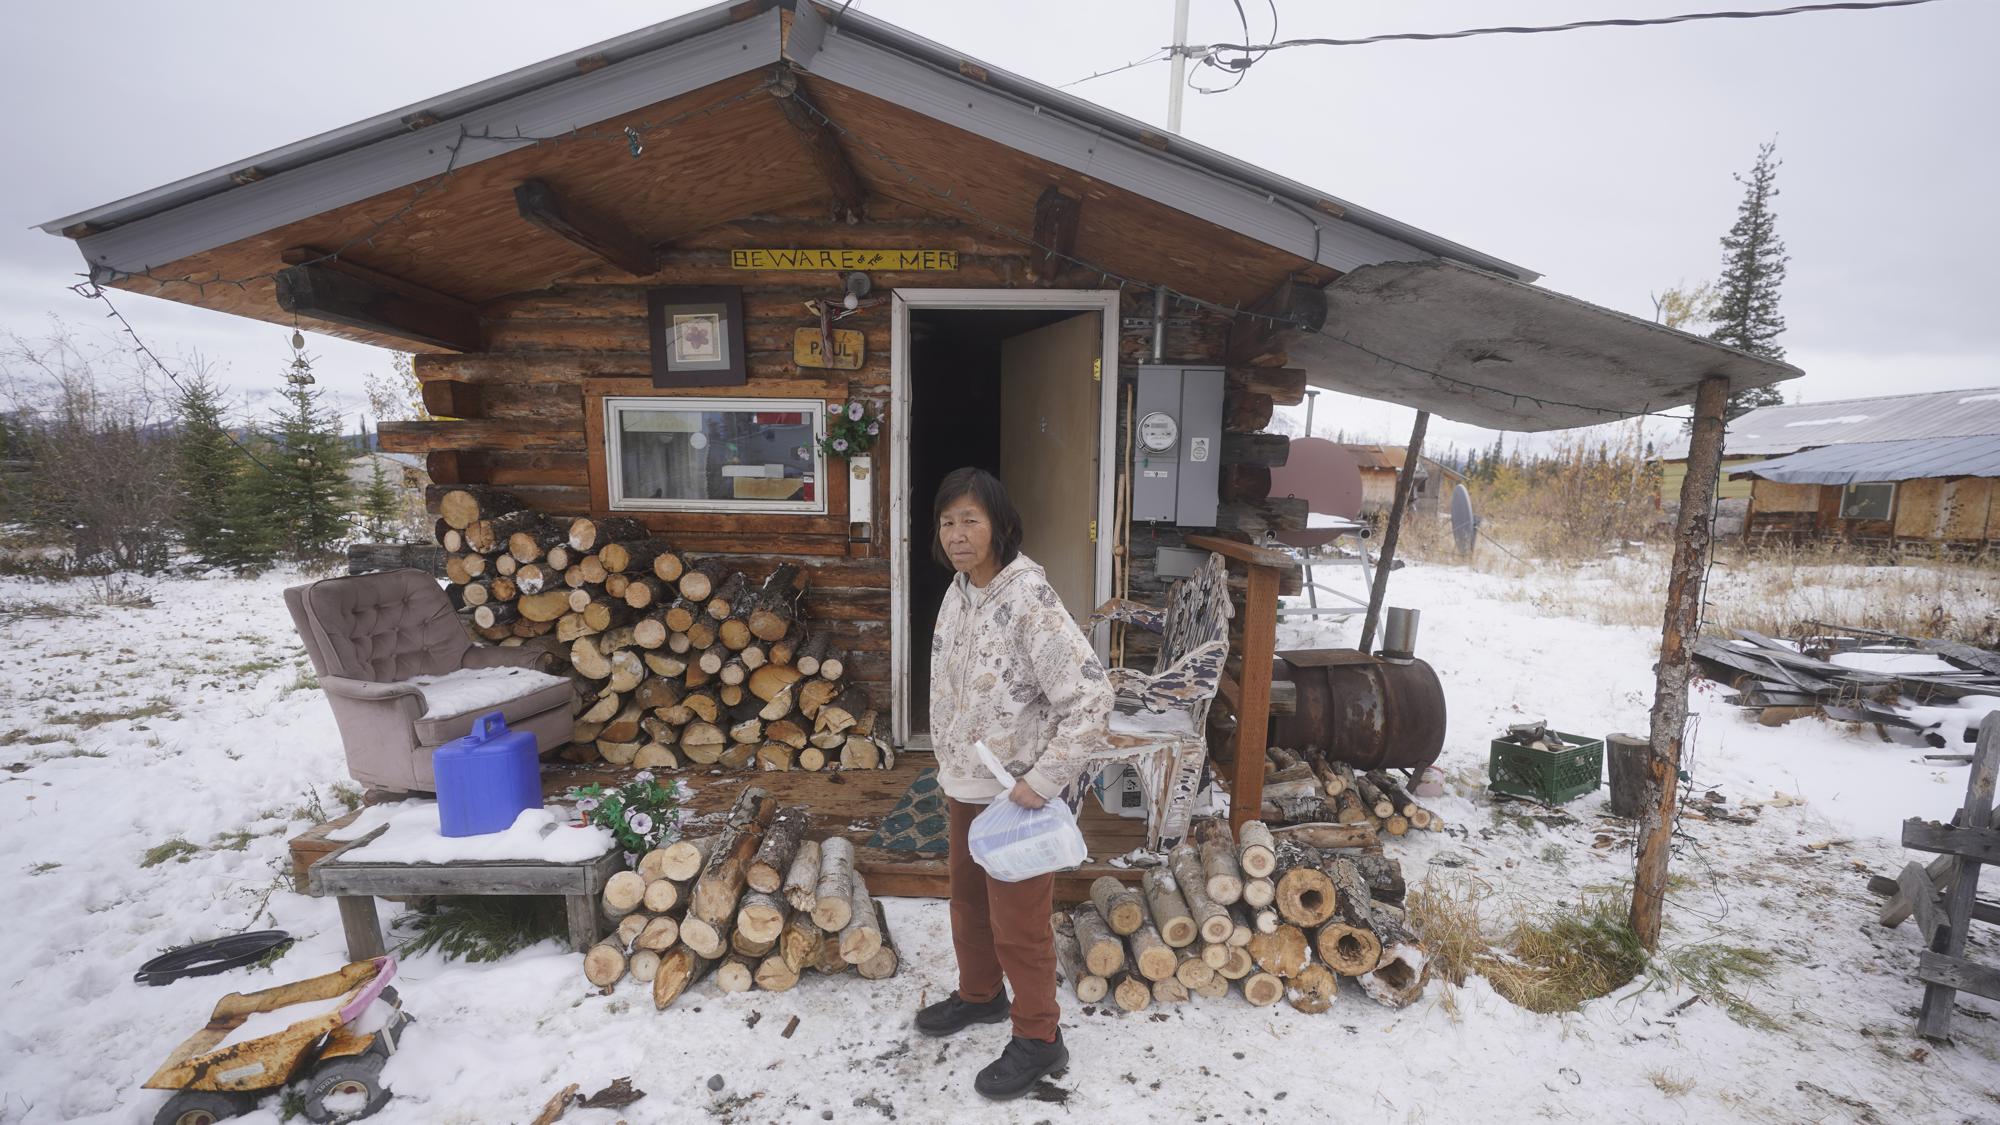 Marilyn Paul stands in front of her home Thursday, Sept. 23, 2021, in Tanacross, Alaska. Alaska is experiencing one of the sharpest rises in COVID-19 cases in the country, coupled with a limited statewide healthcare system that is almost entirely reliant on Anchorage hospitals. (AP Photo/Rick Bowmer)